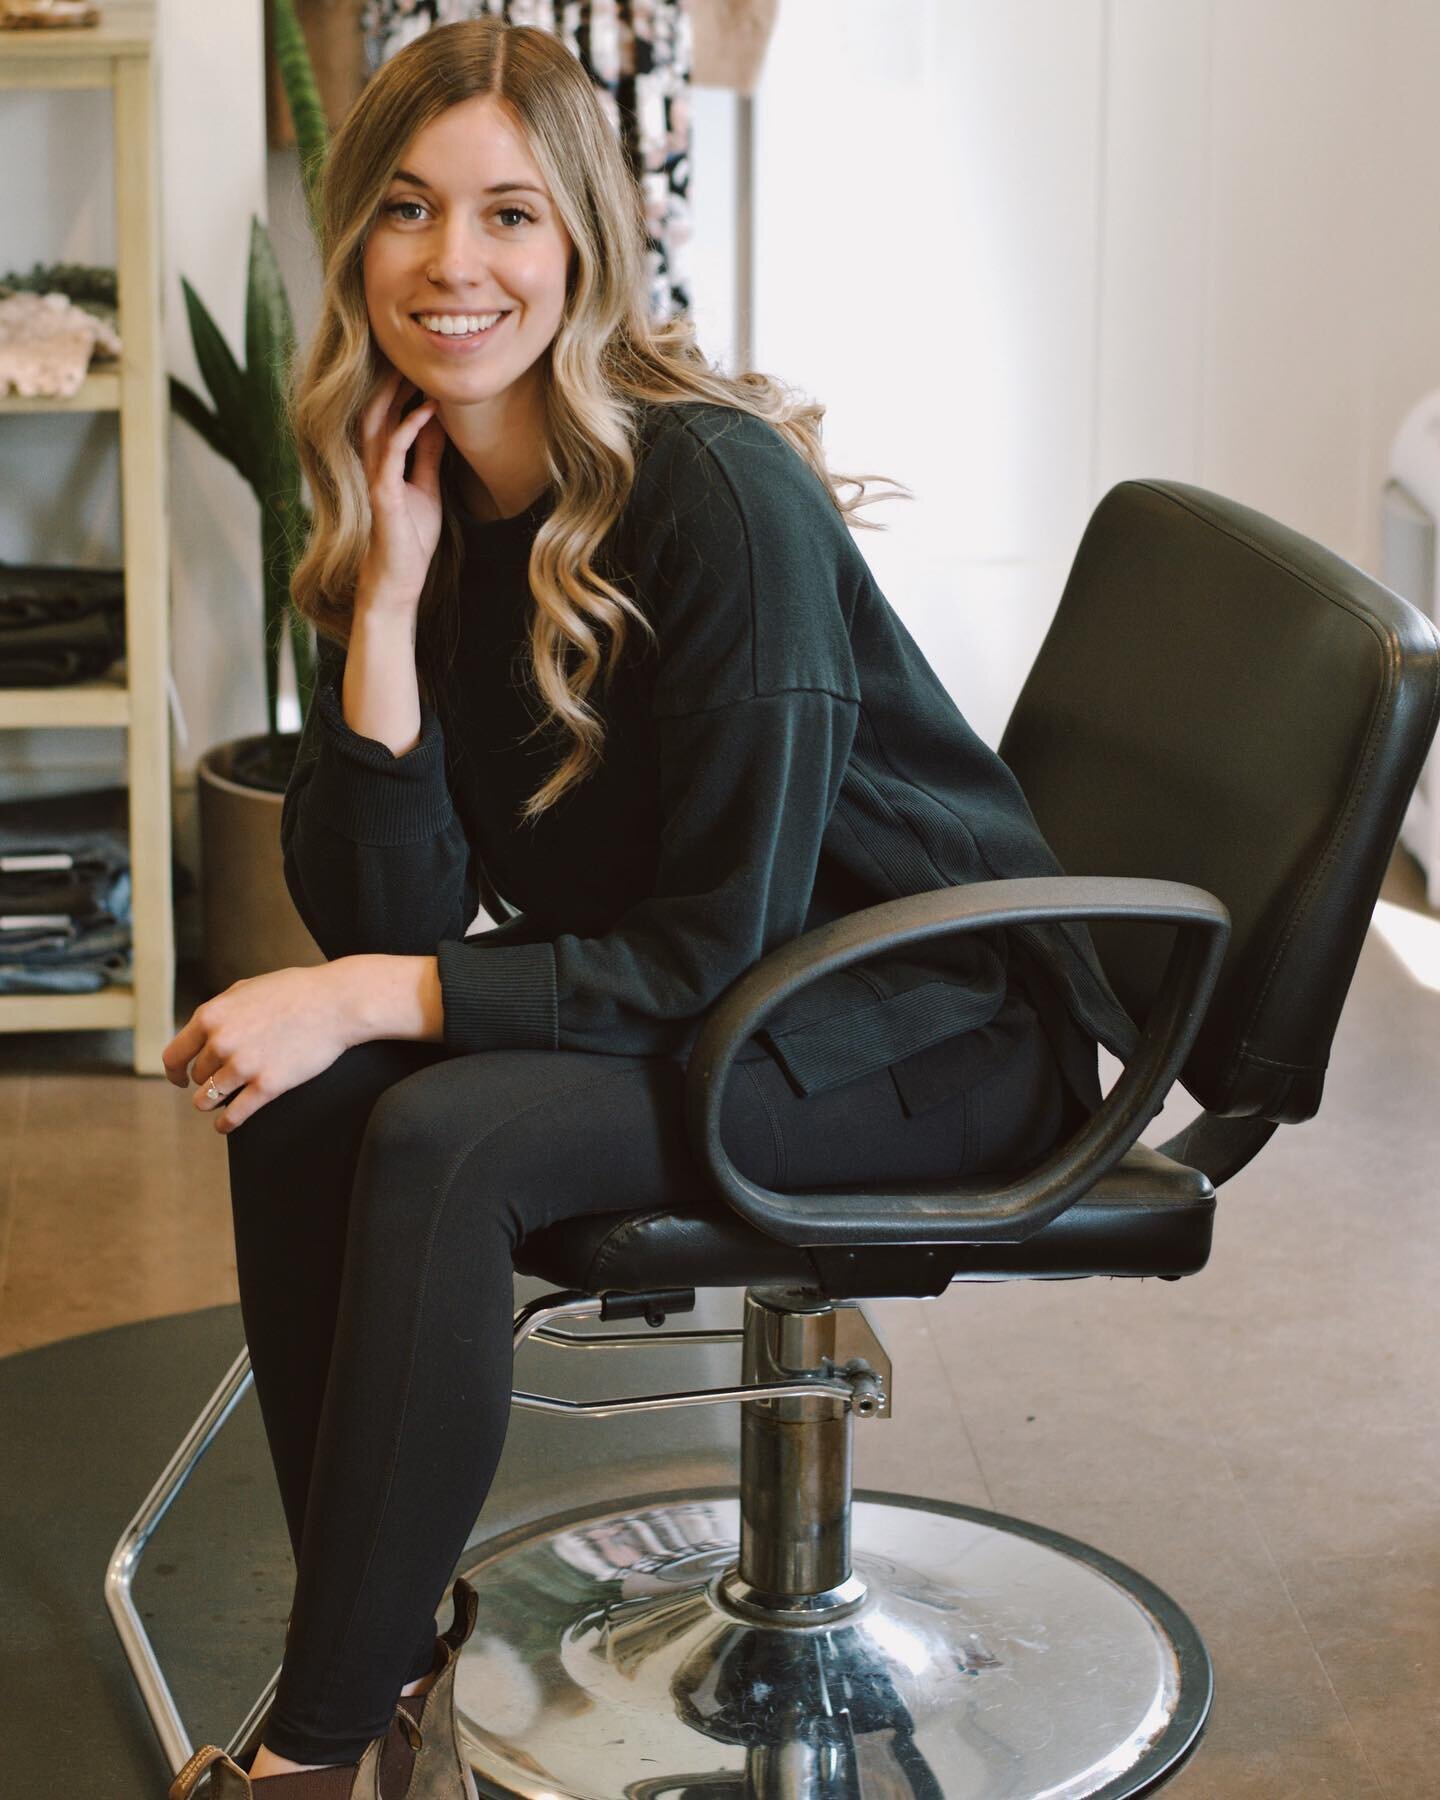 We are SUPER excited to welcome @tiamorinhair to the Glow studio ✨ 

As of June 1st she will be officially moved in to Front street. Tia is a kind spirit, she&rsquo;s super passionate, and such a fun person to be around! We can&rsquo;t wait to see wh